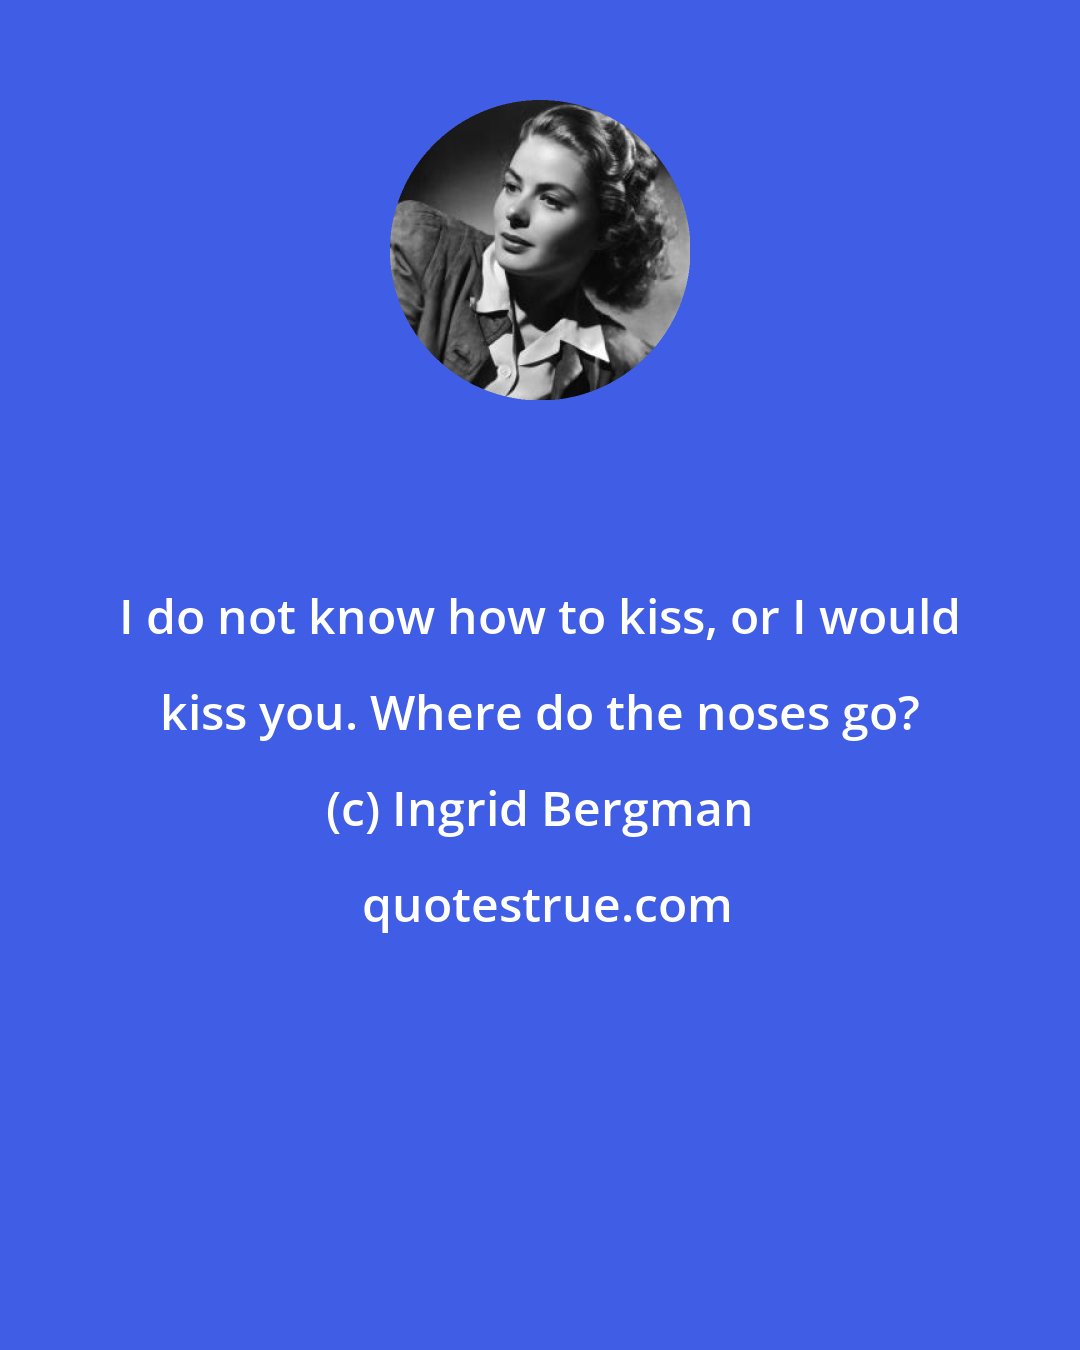 Ingrid Bergman: I do not know how to kiss, or I would kiss you. Where do the noses go?